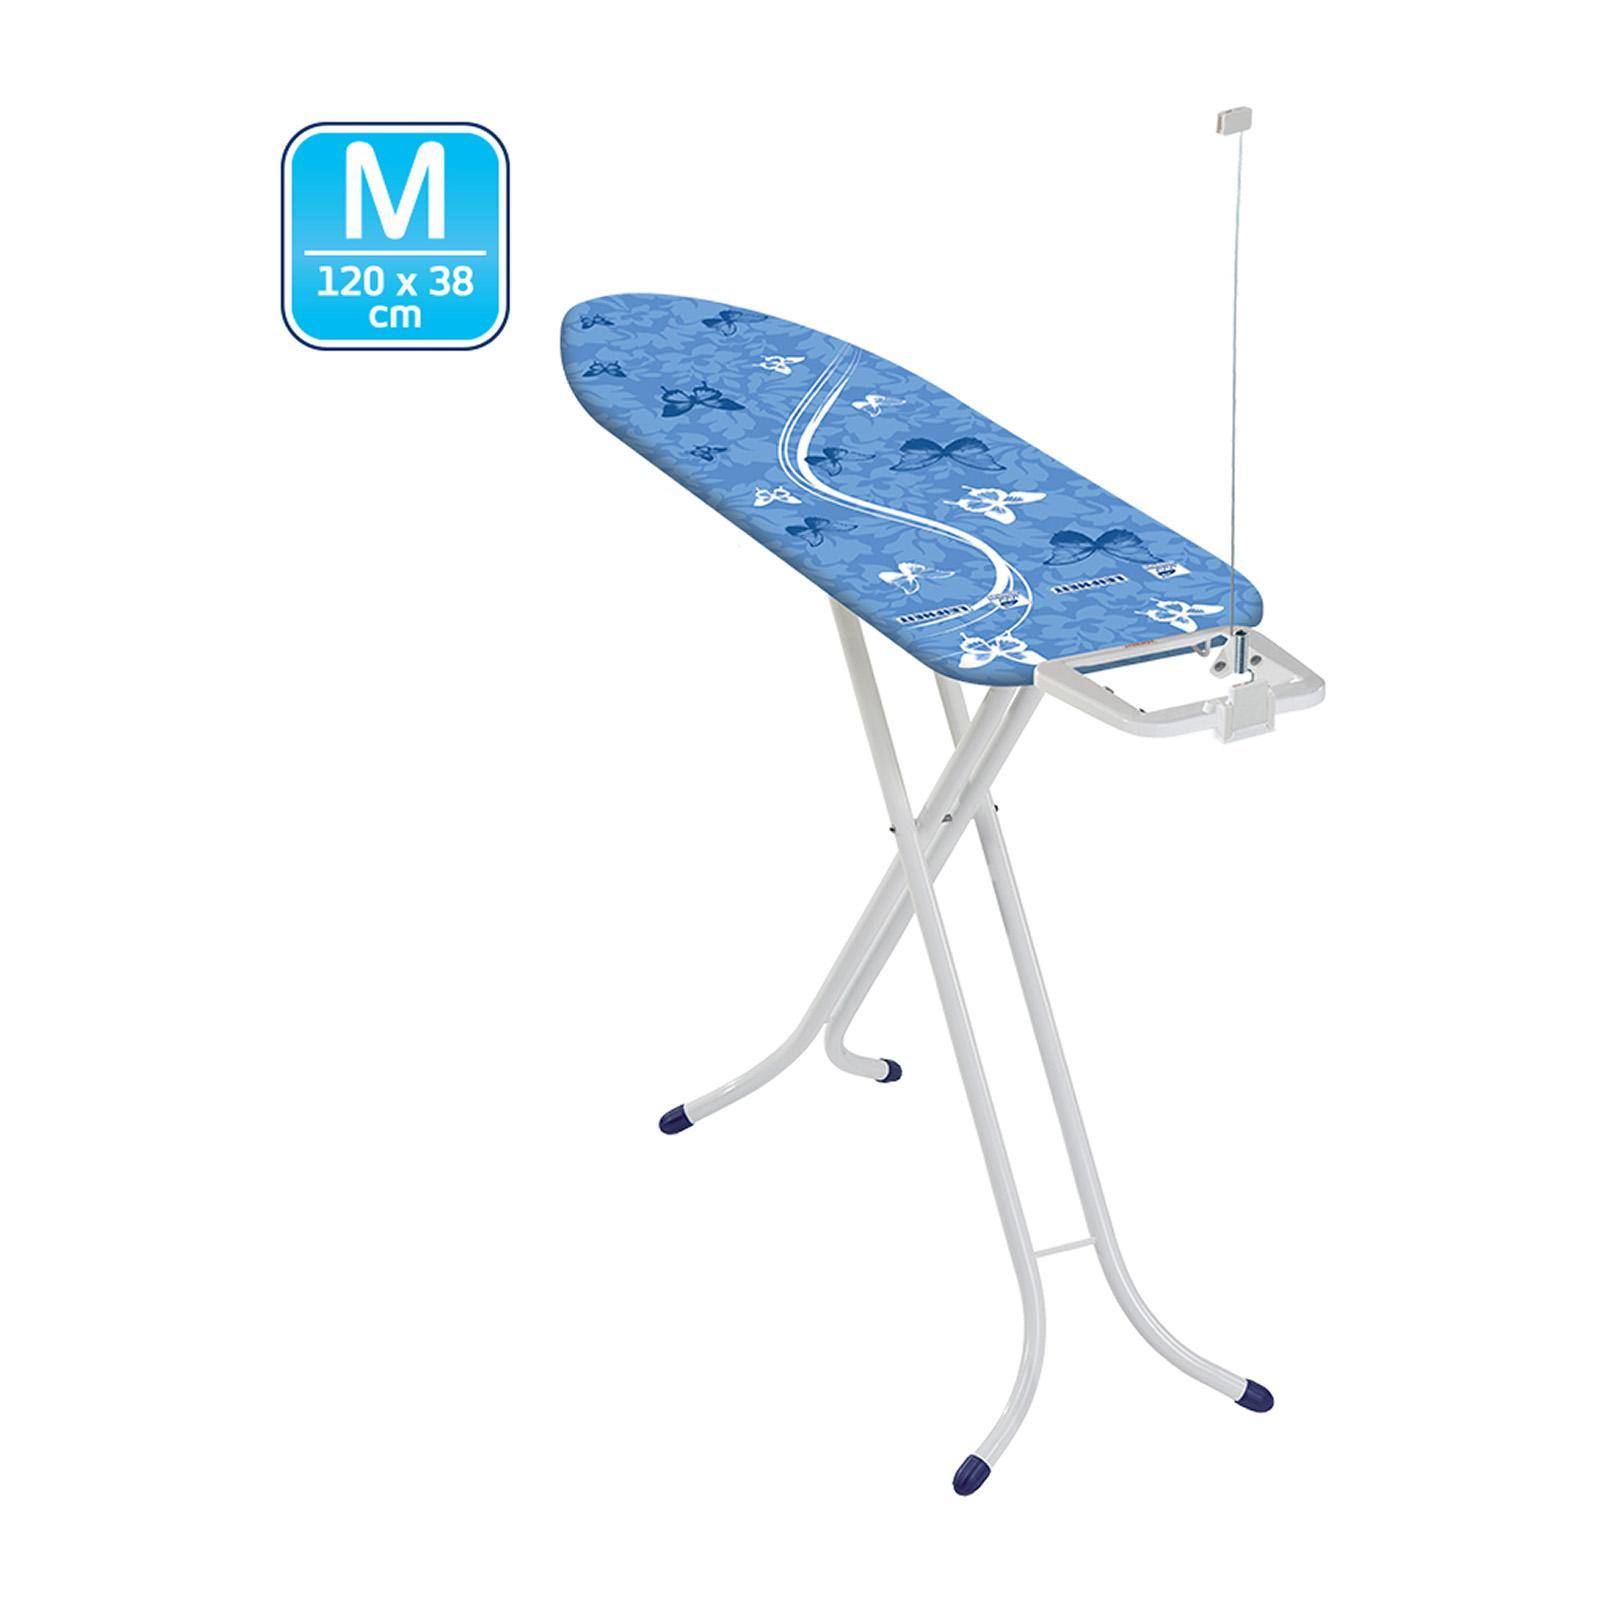 LEIFHEIT Ironing Airboard M Compact Perfect For Steam Iron Rust Free L72585  | Lazada Singapore